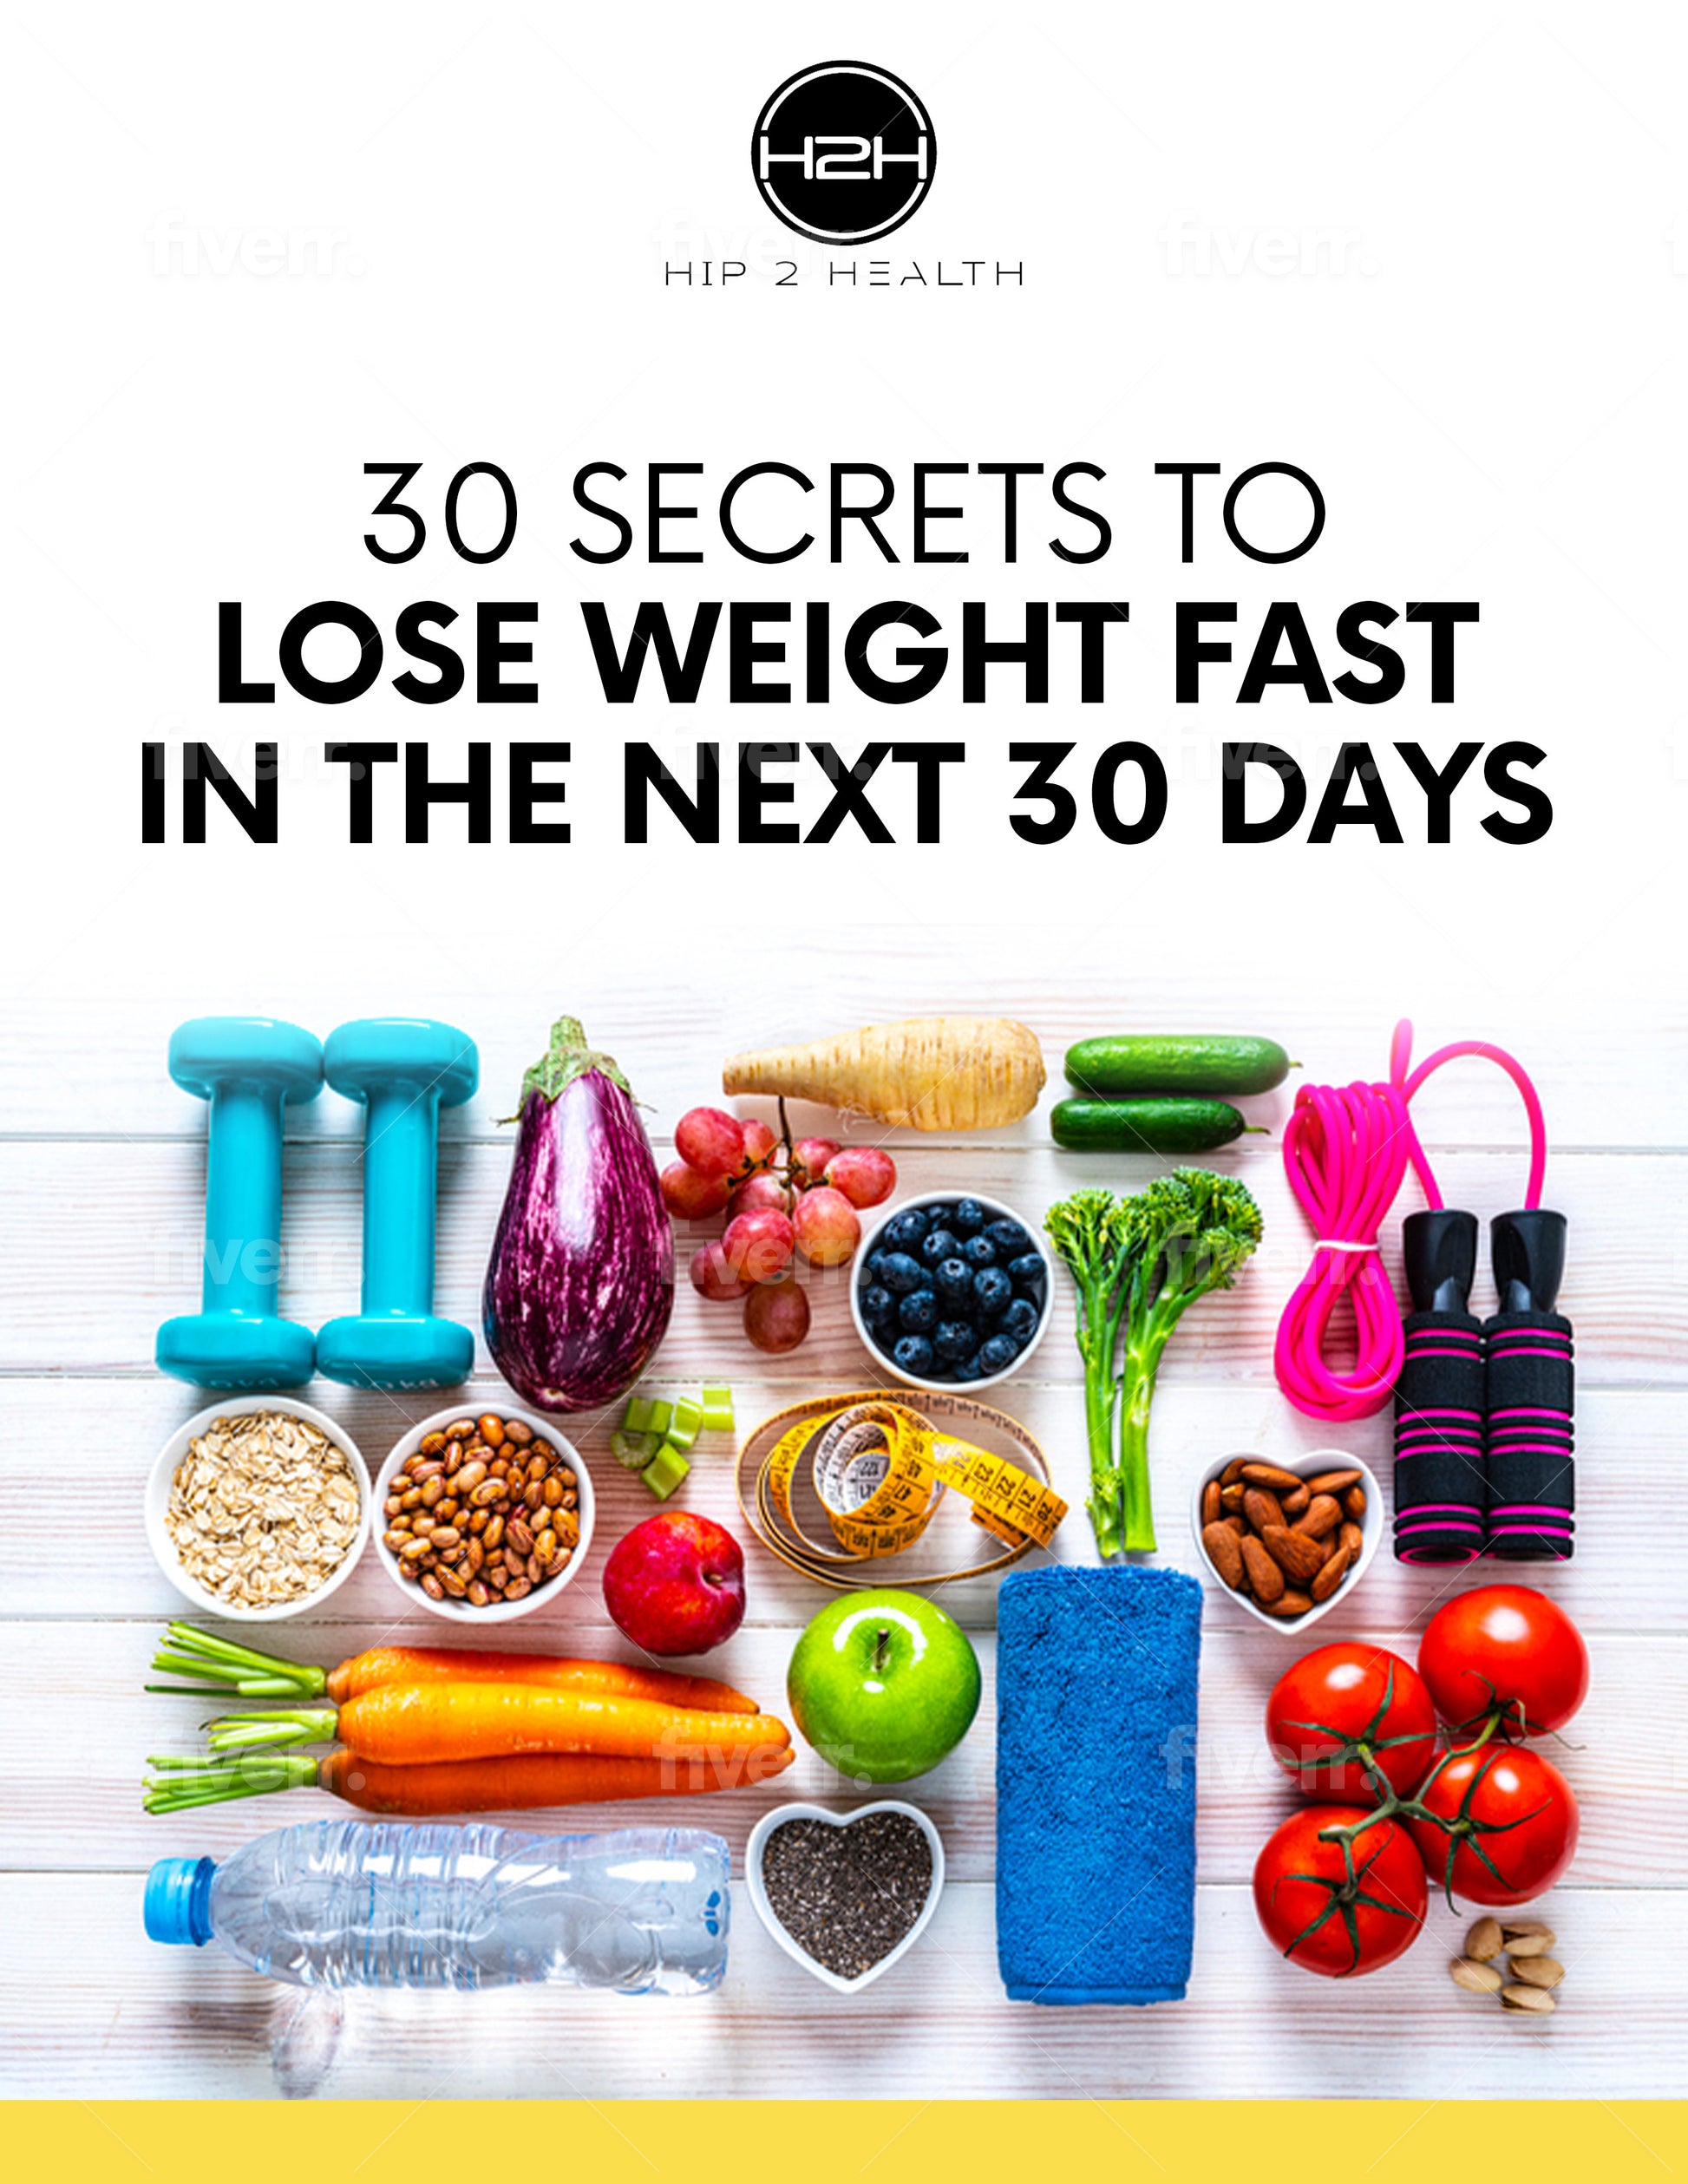 30 SECRETS To Lose Weight Fast In 30 Days EBOOK – Hip 2 Health